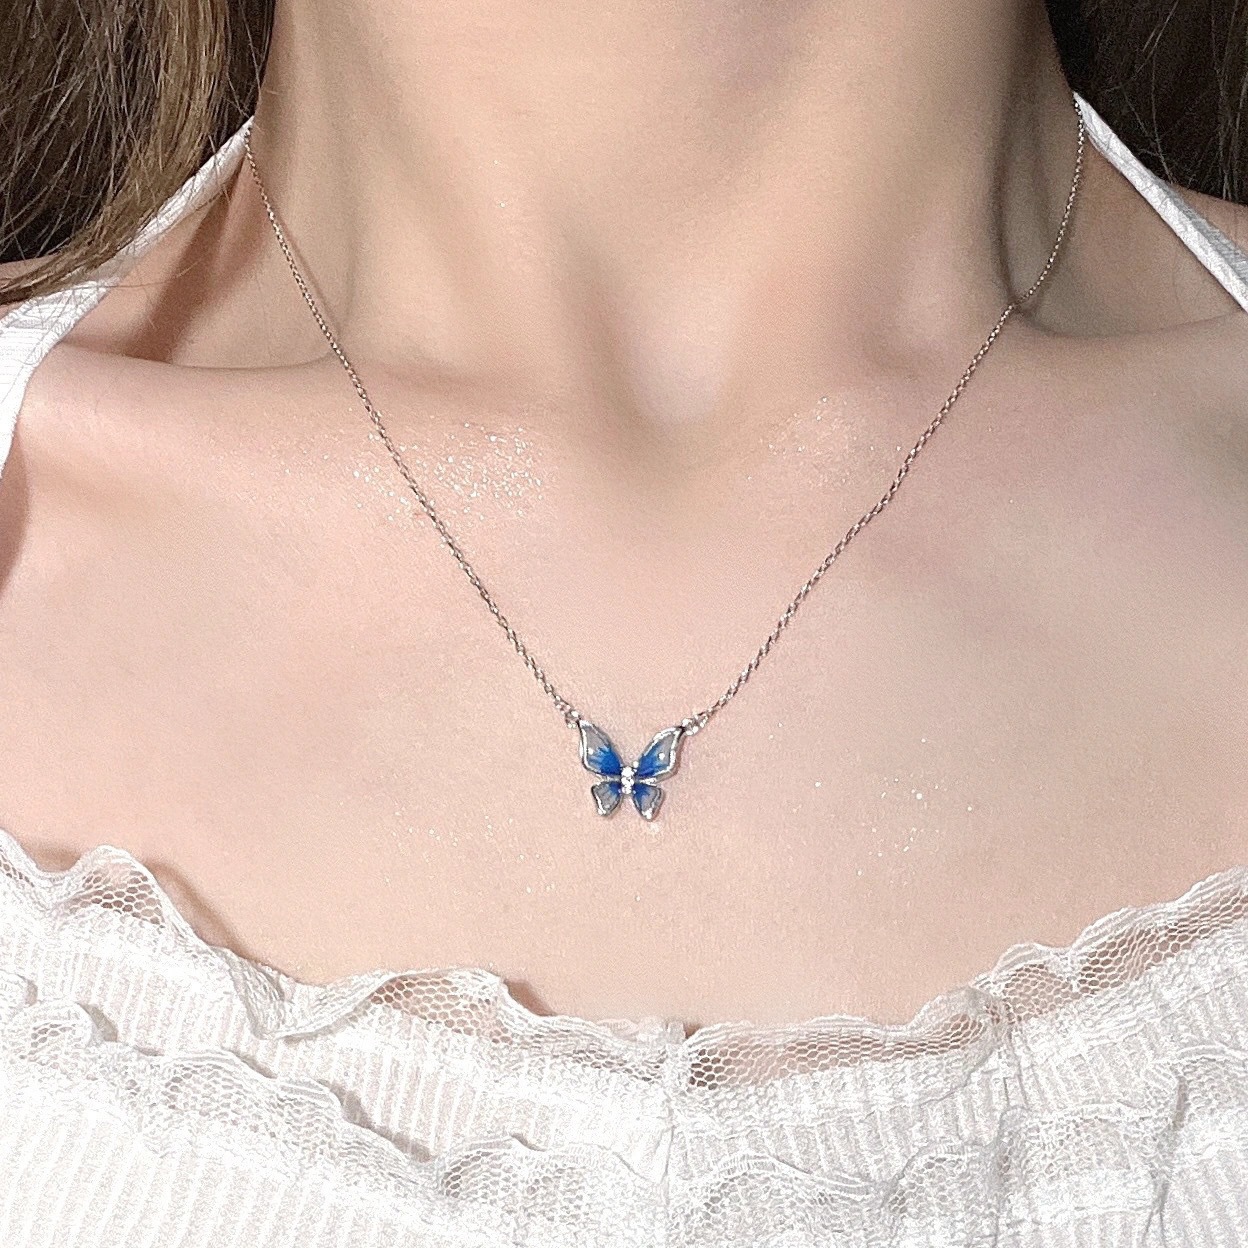 Necklace Female Ins Clavicle Chain Neck Chain Female Butterfly Necklace Light Luxury Minority Advanced Design Sense Student Girlfriends All-Matching